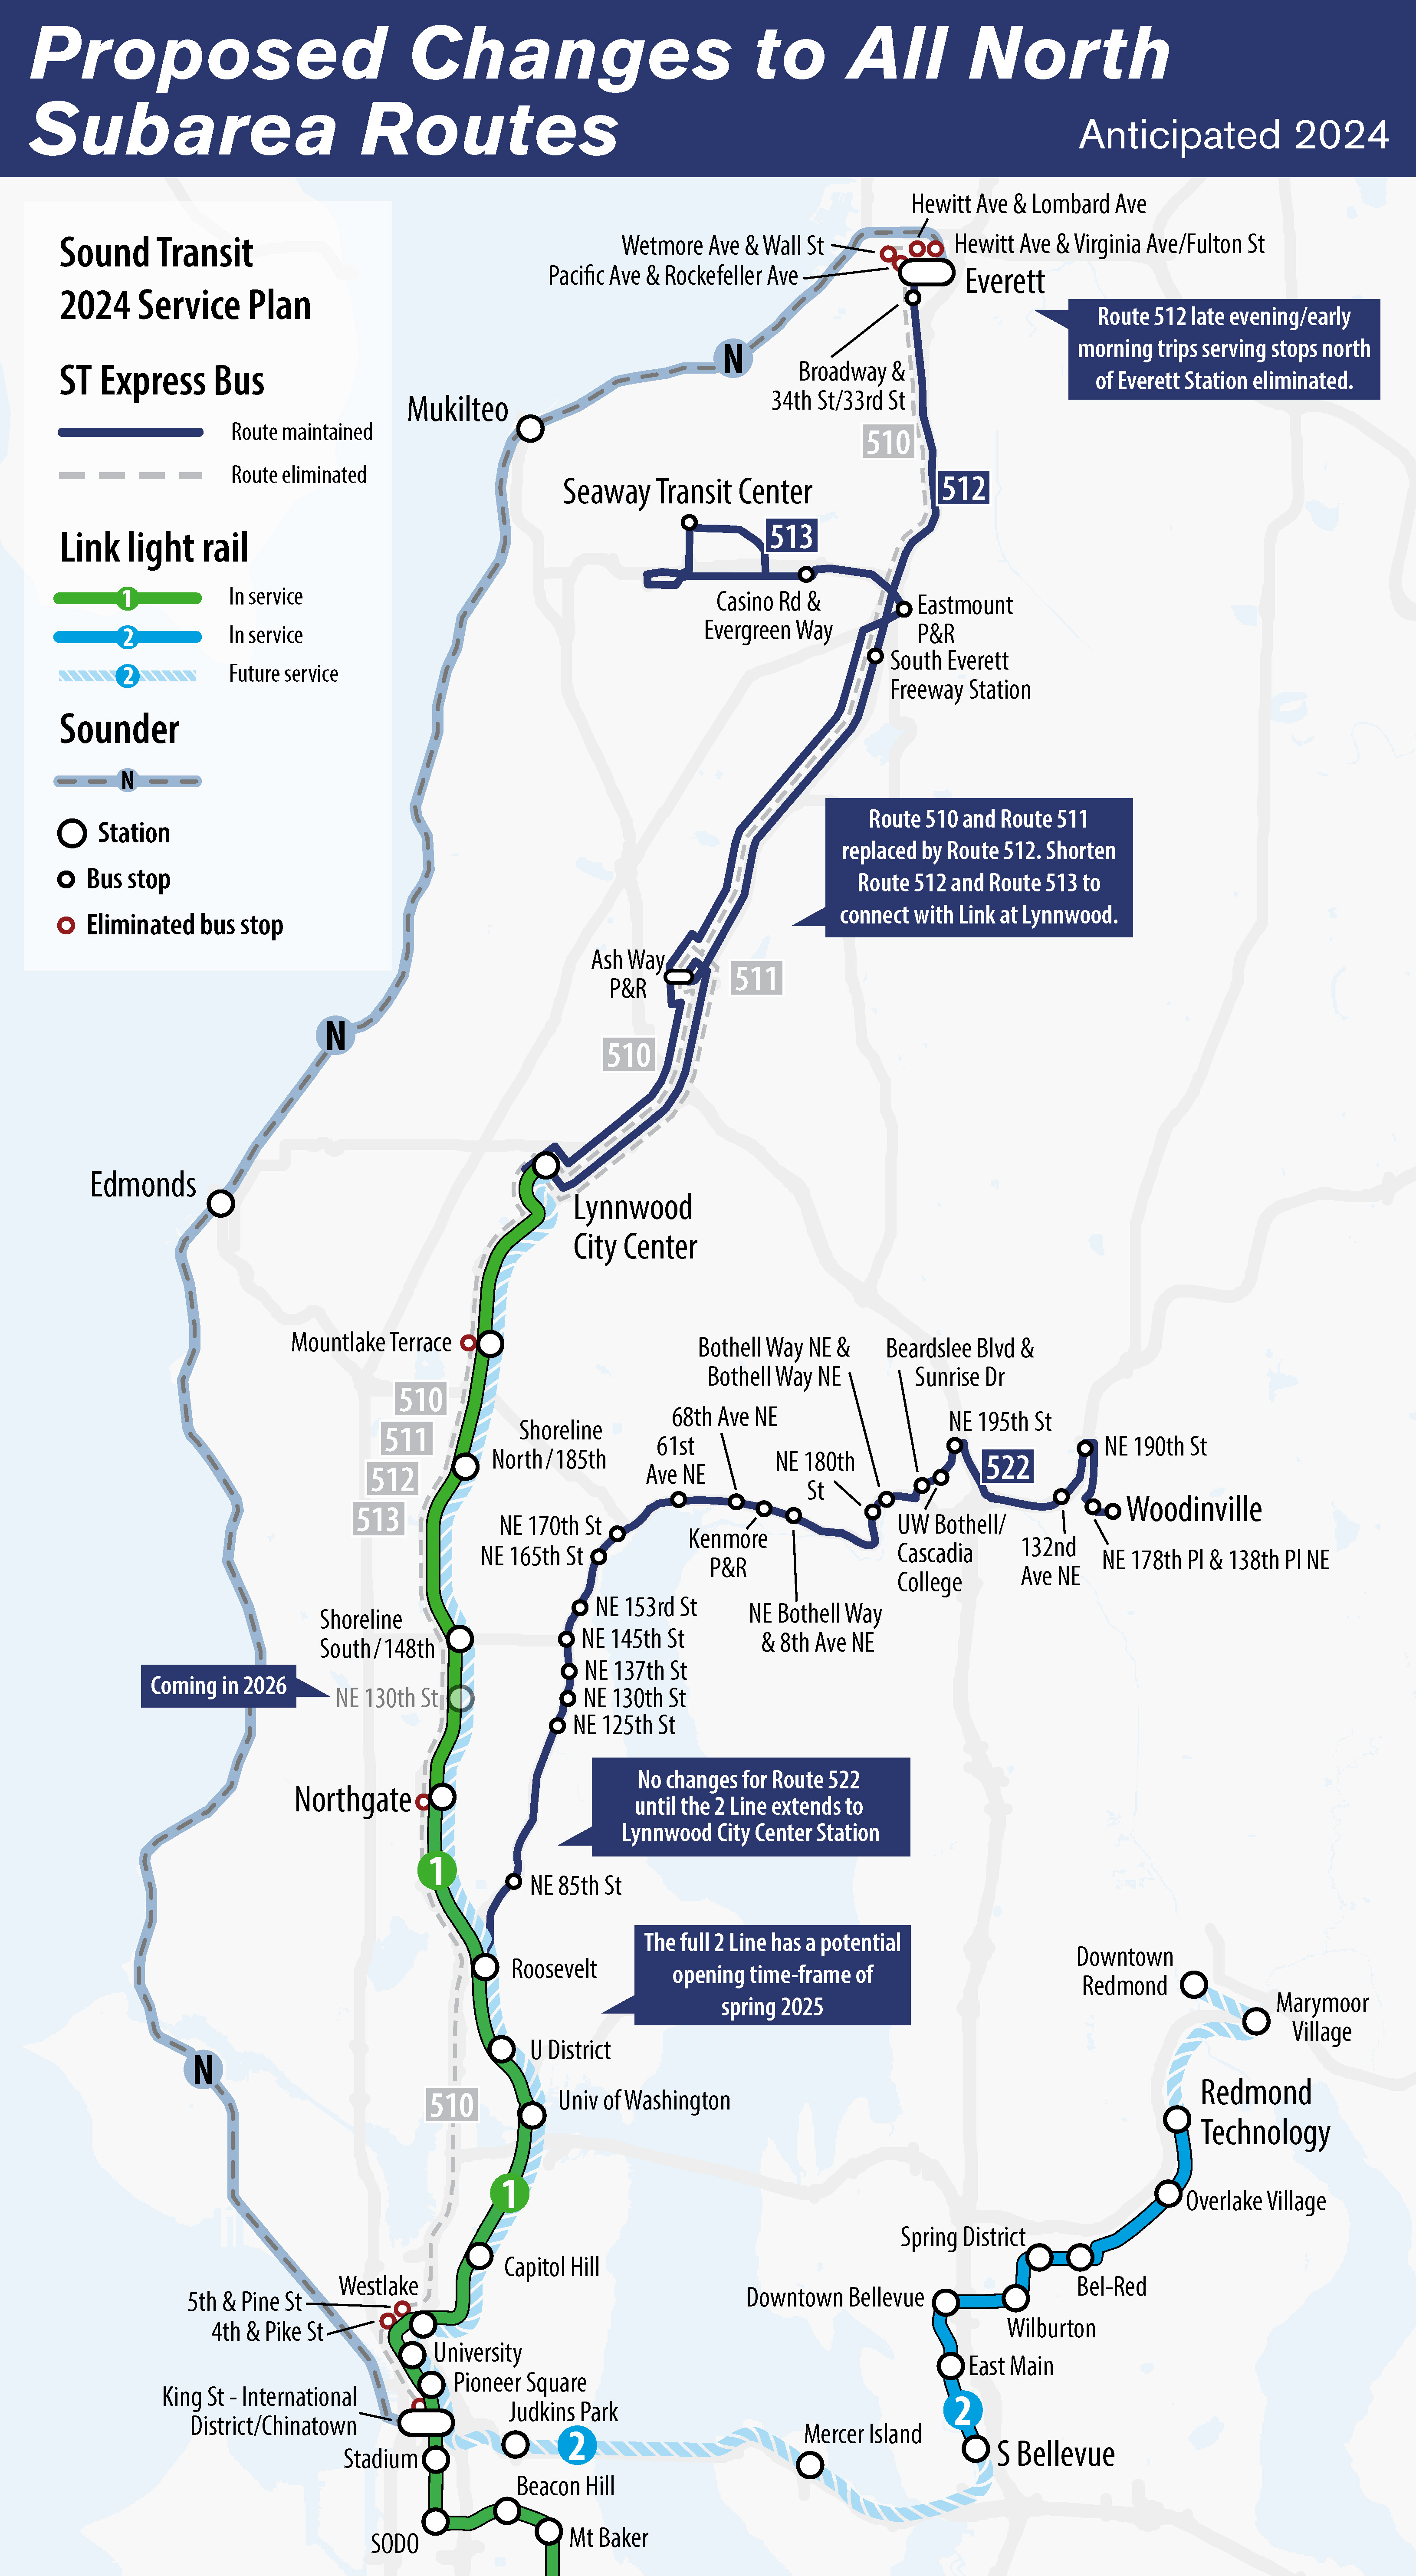 A map showing proposed changes to Sound Transit's services in the north subarea, which connects Snohomish County and North King County to the Seattle area. The map shows the proposed changes in the context of the areas north and east of Seattle.   


    The map shows a Sounder train route from Everett to King Street Station. Link light rail lines (referred to as the 1 Line on the map) are also shown. The 1 Line is depicted in green showing the route once Lynnwood Link Extension opens; Lynnwood City Center is shown in the north and Mt. Baker in the south. The 2 Line is also shown, but with a different shading depicting the East Link Starter Line from South Bellevue to Redmond Technology. The remainder of the 2 Line that could potentially open later than the East Link Starter Line is shown with a lighter coloring; those areas that may open later stretch from downtown Seattle to South Bellevue, as well as the area between Redmond Technology and Downtown Redmond.  
    
        
    The map also shows proposed changes to Express bus routes. Route 522 is shown running from Woodinville to Roosevelt Station in Seattle, route 512 is shown from Everett to Lynnwood City Center and 513 is shown from Seaway Transit Center to Lynnwood City Center. Routes 510 and 511 are depicted in a light gray dotted line, indicating that Sound Transit is proposing eliminating routes 510 and 511 in 2024